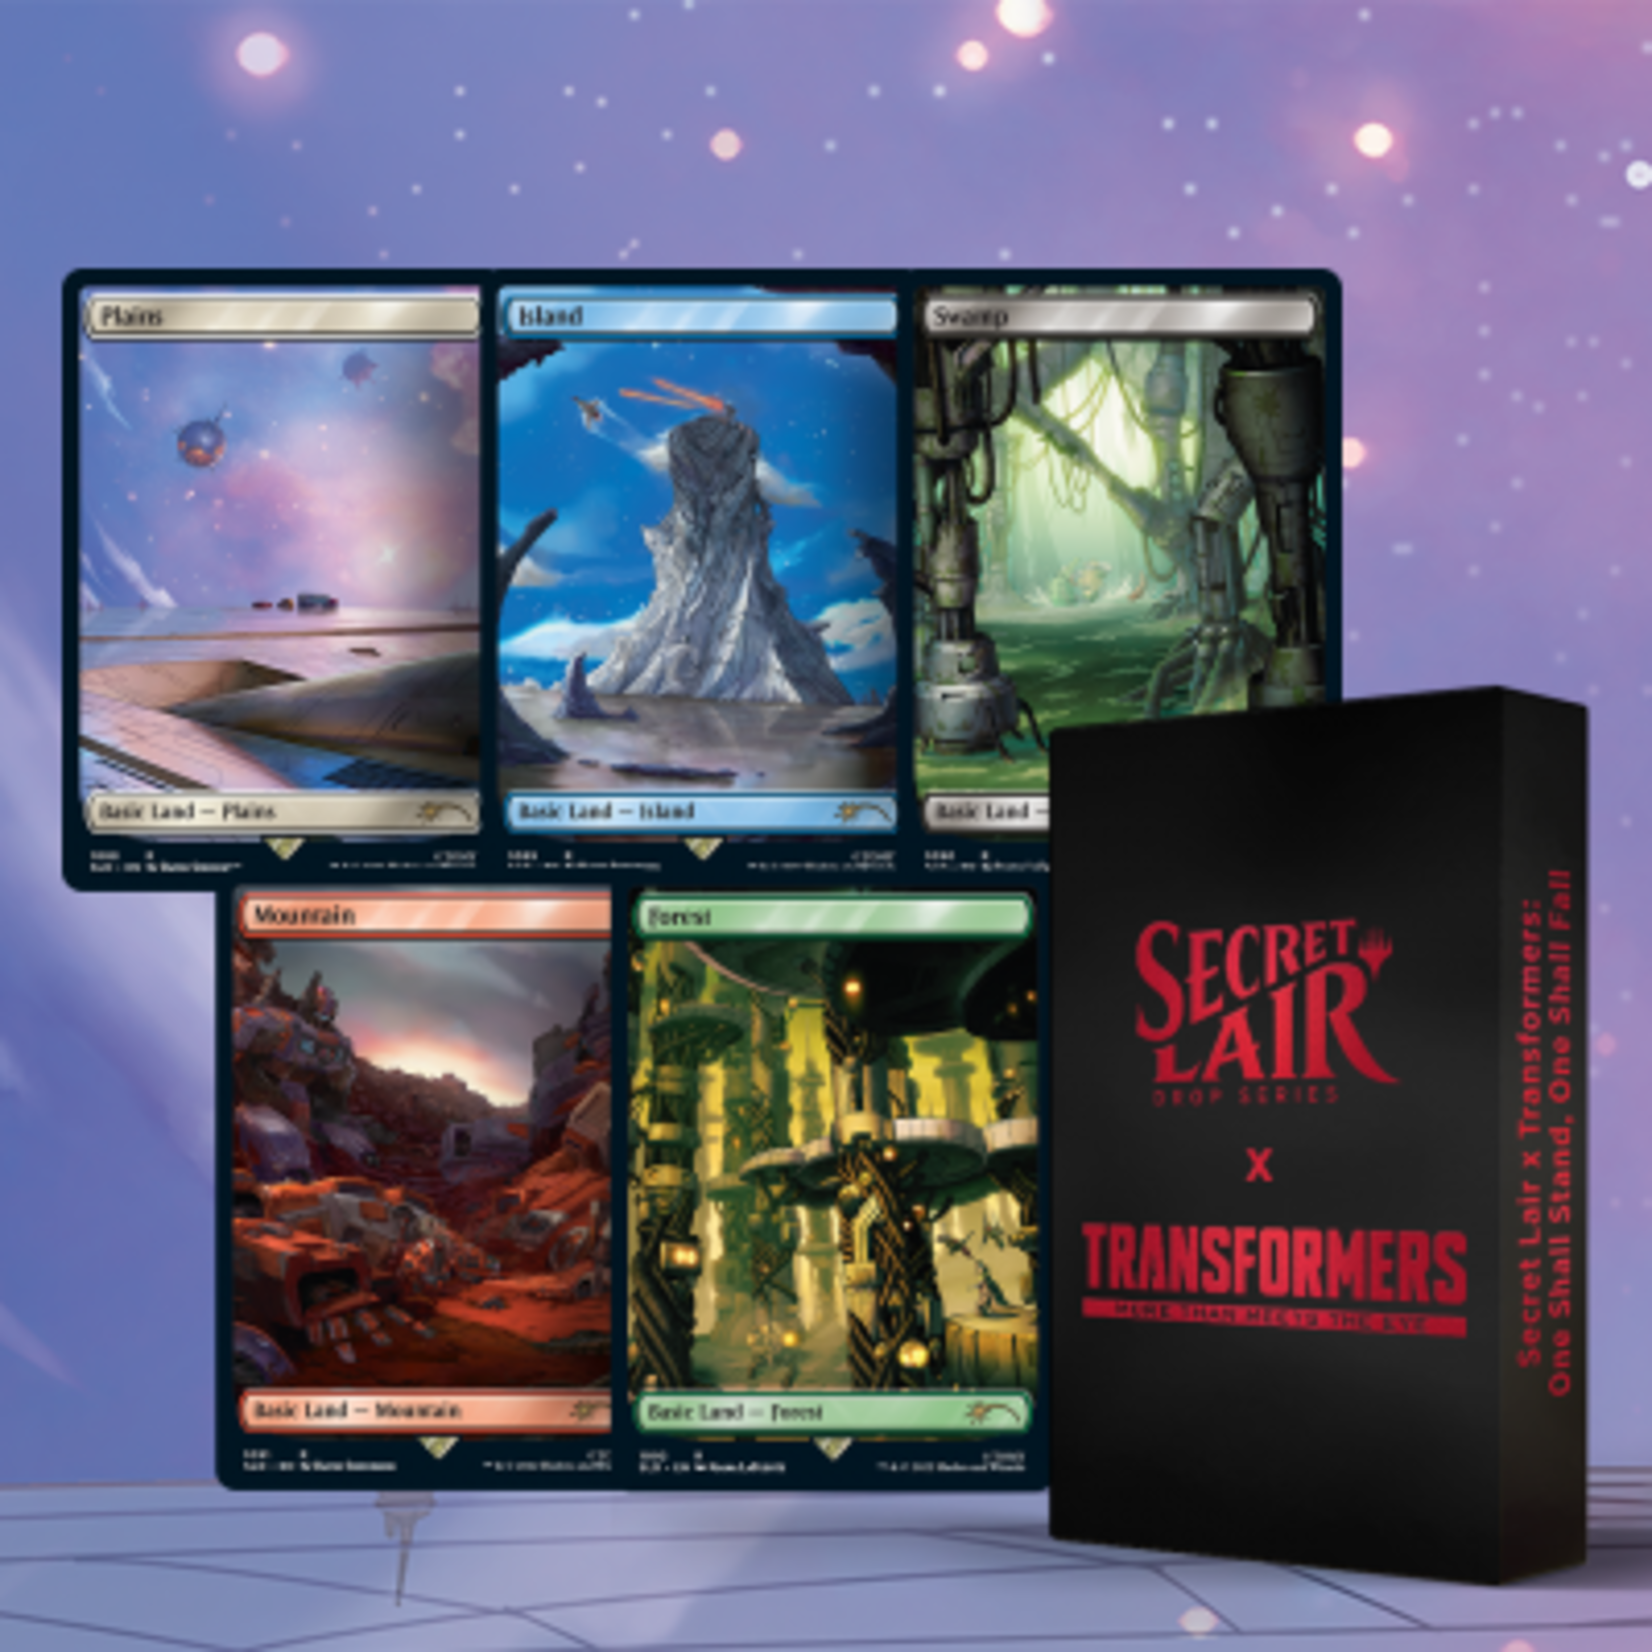 Wizards of the Coast MTG: Secret Lair x Transformers - One Shall Stand, One Shall Fall